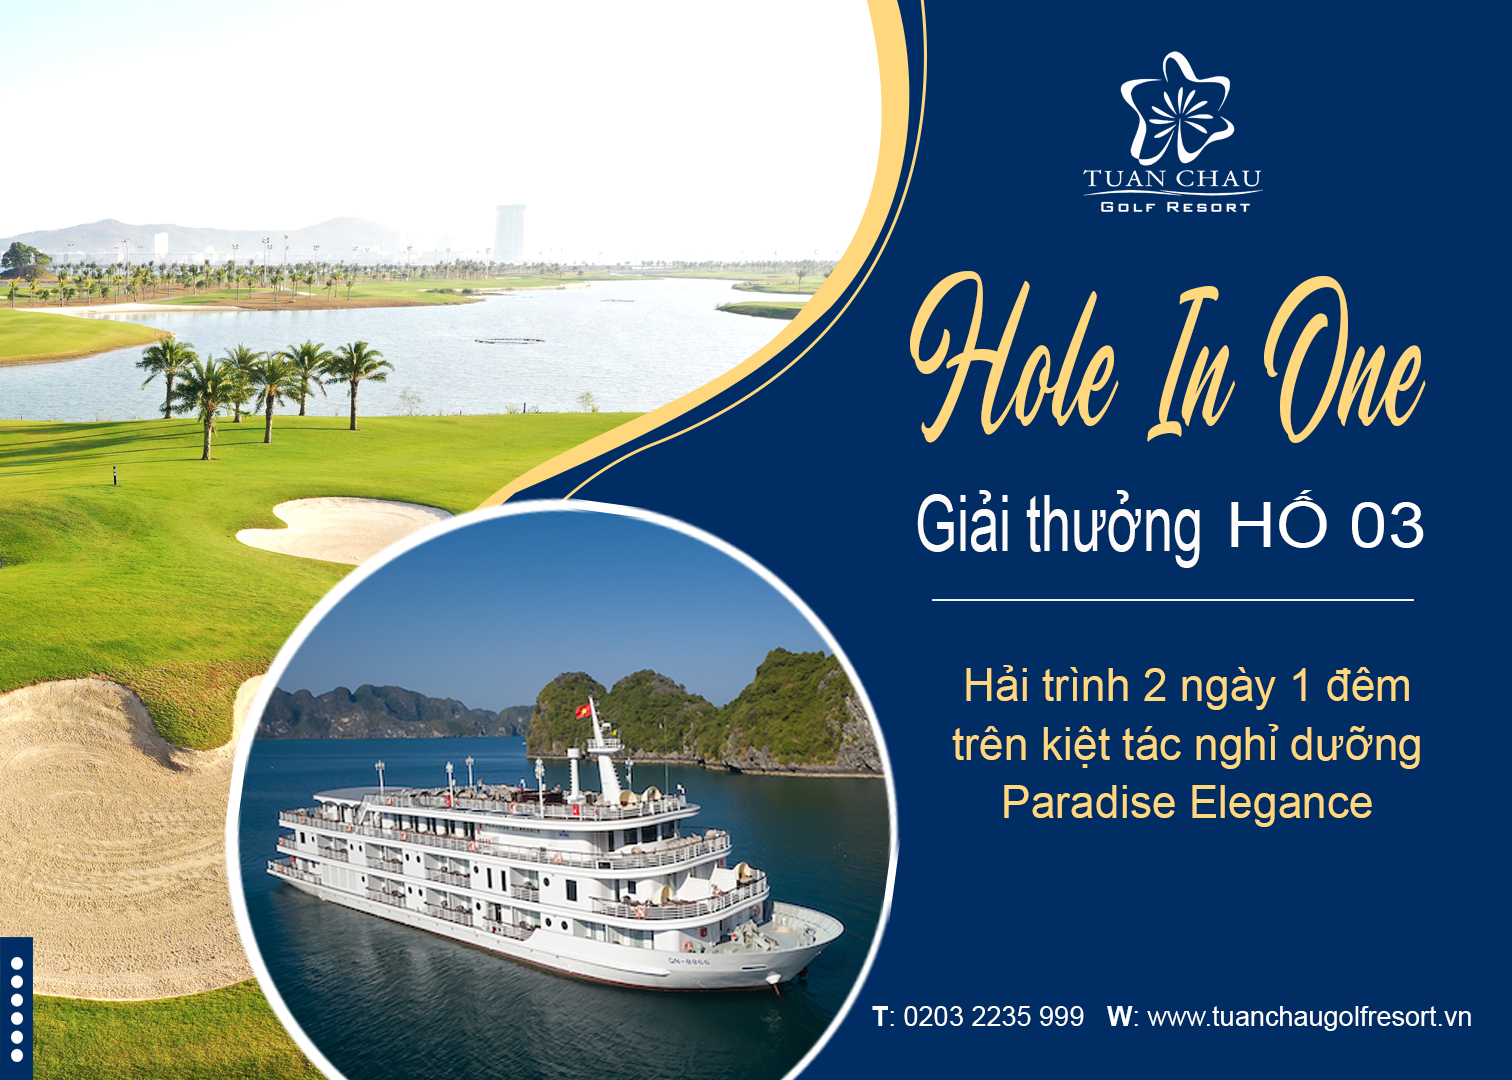 Giải thưởng Hole In One - Hố 3